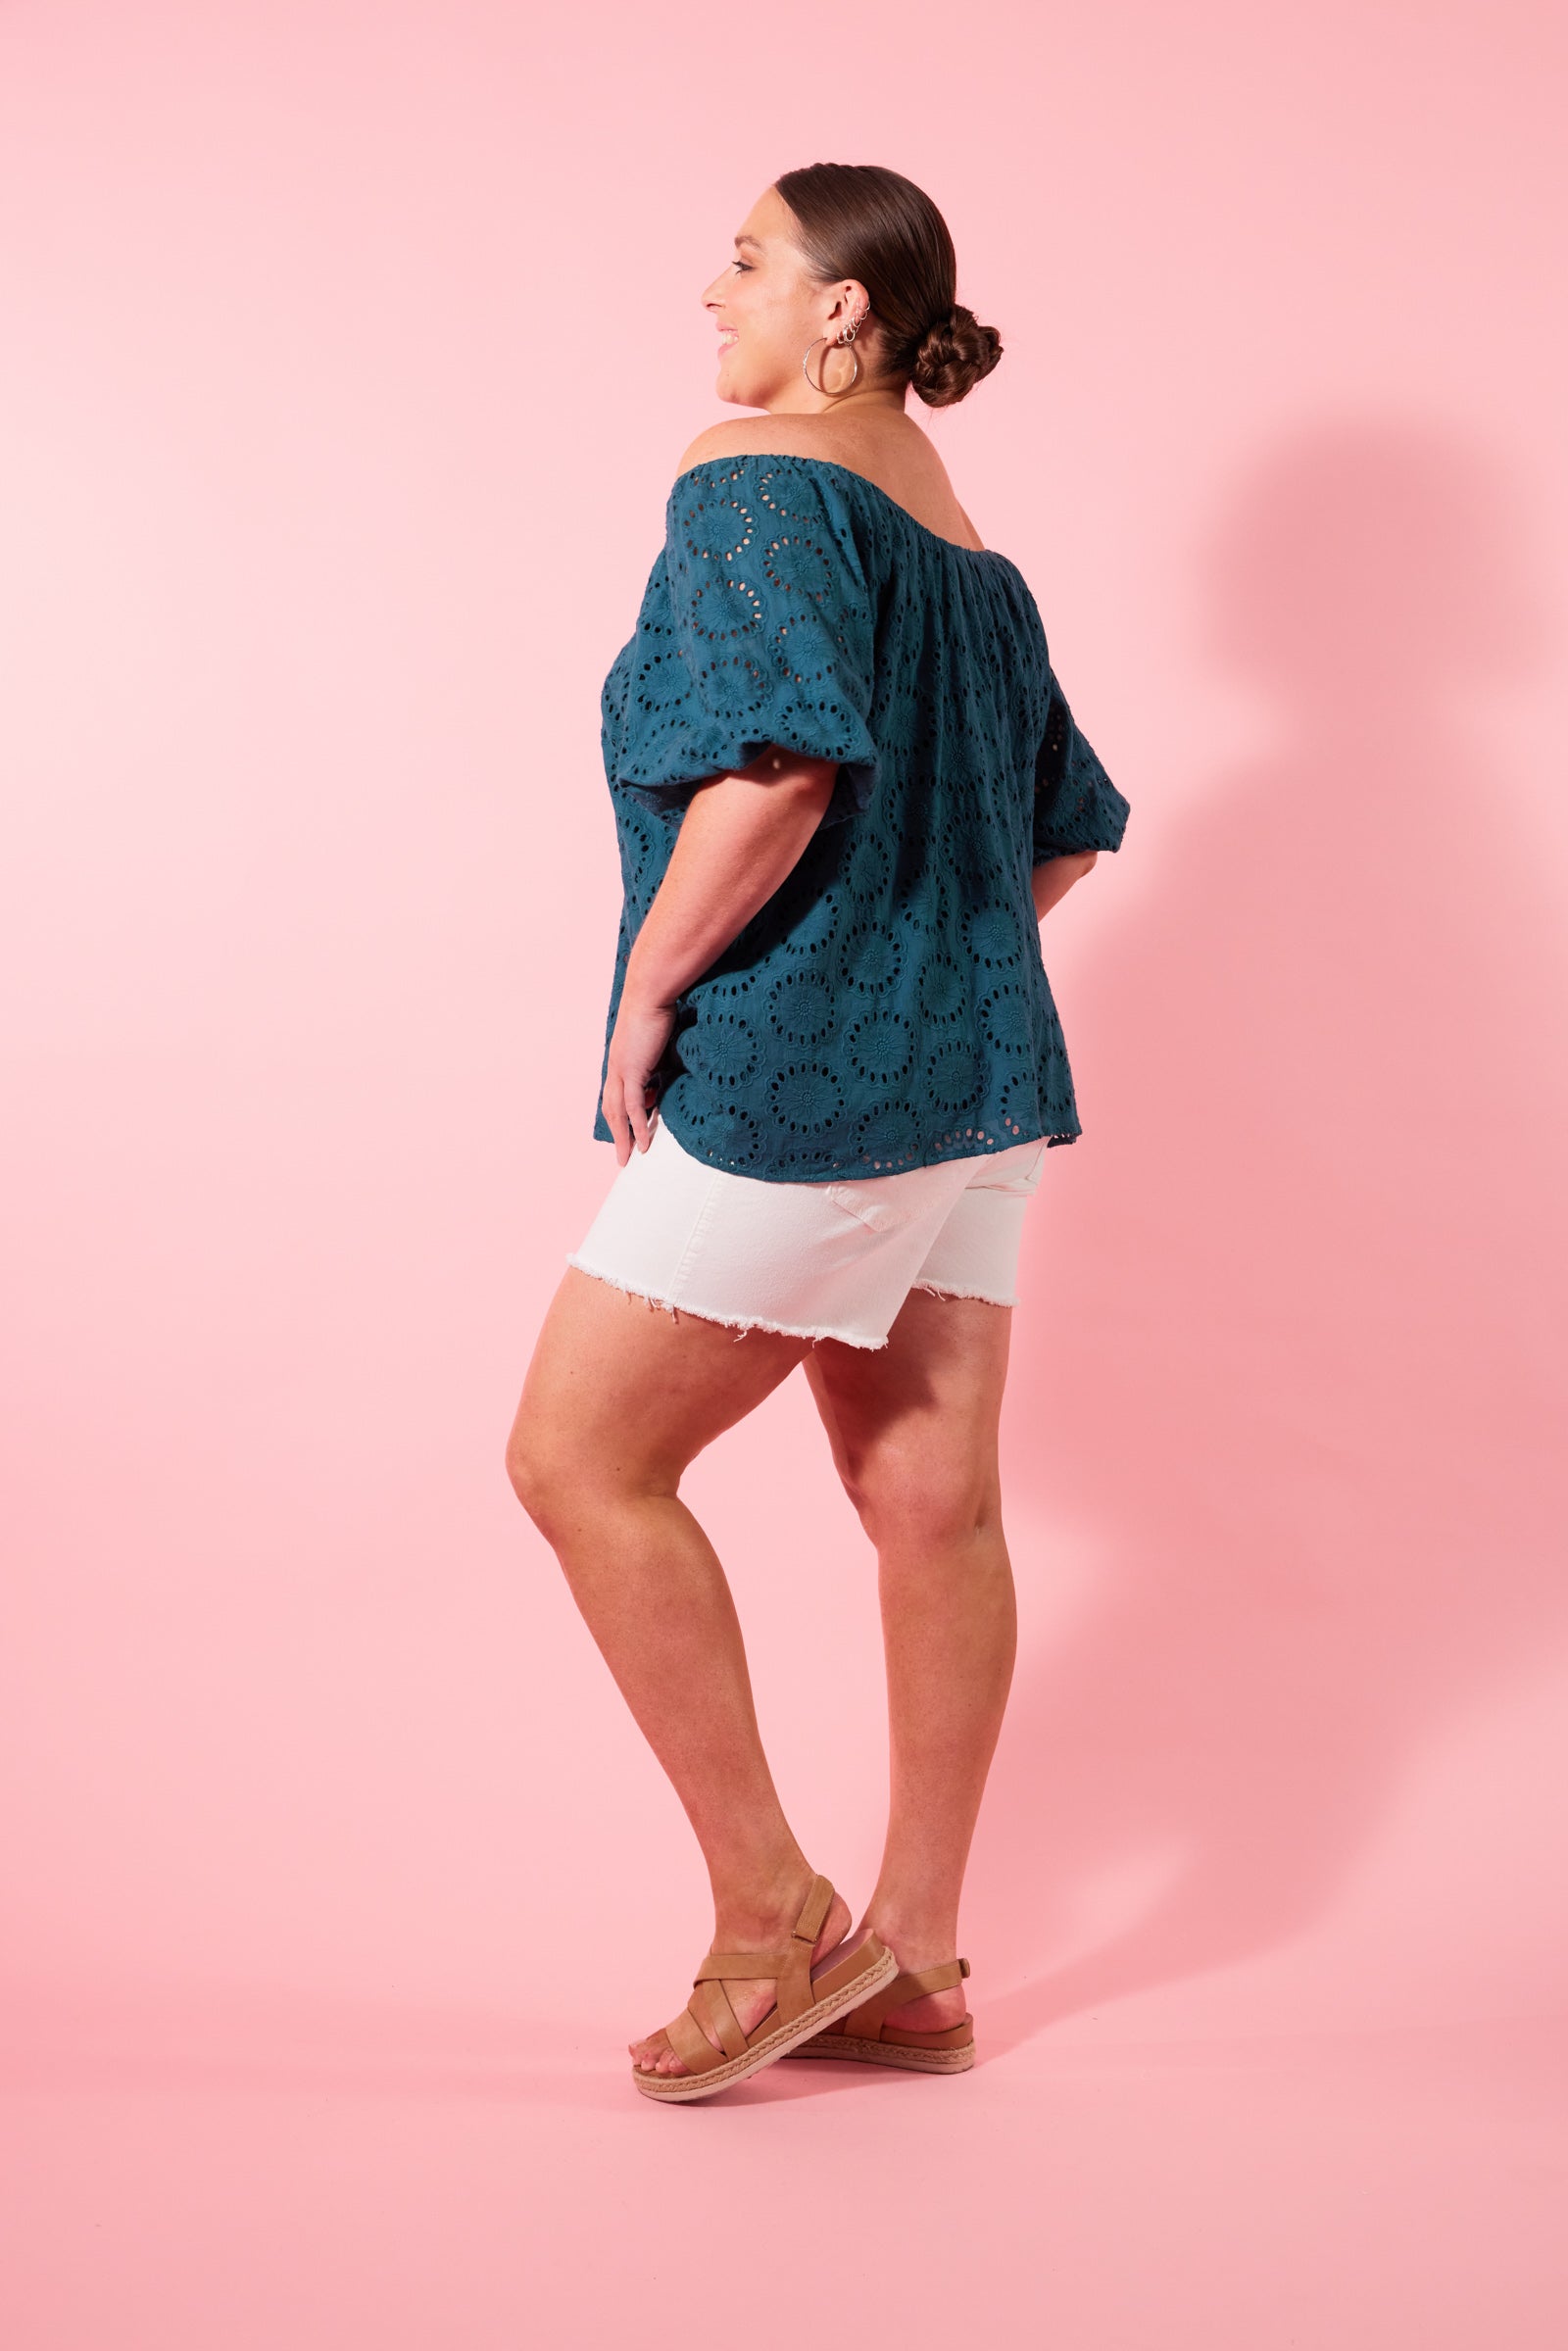 Parterre Top - Teal - Isle of Mine Clothing - Top S/S